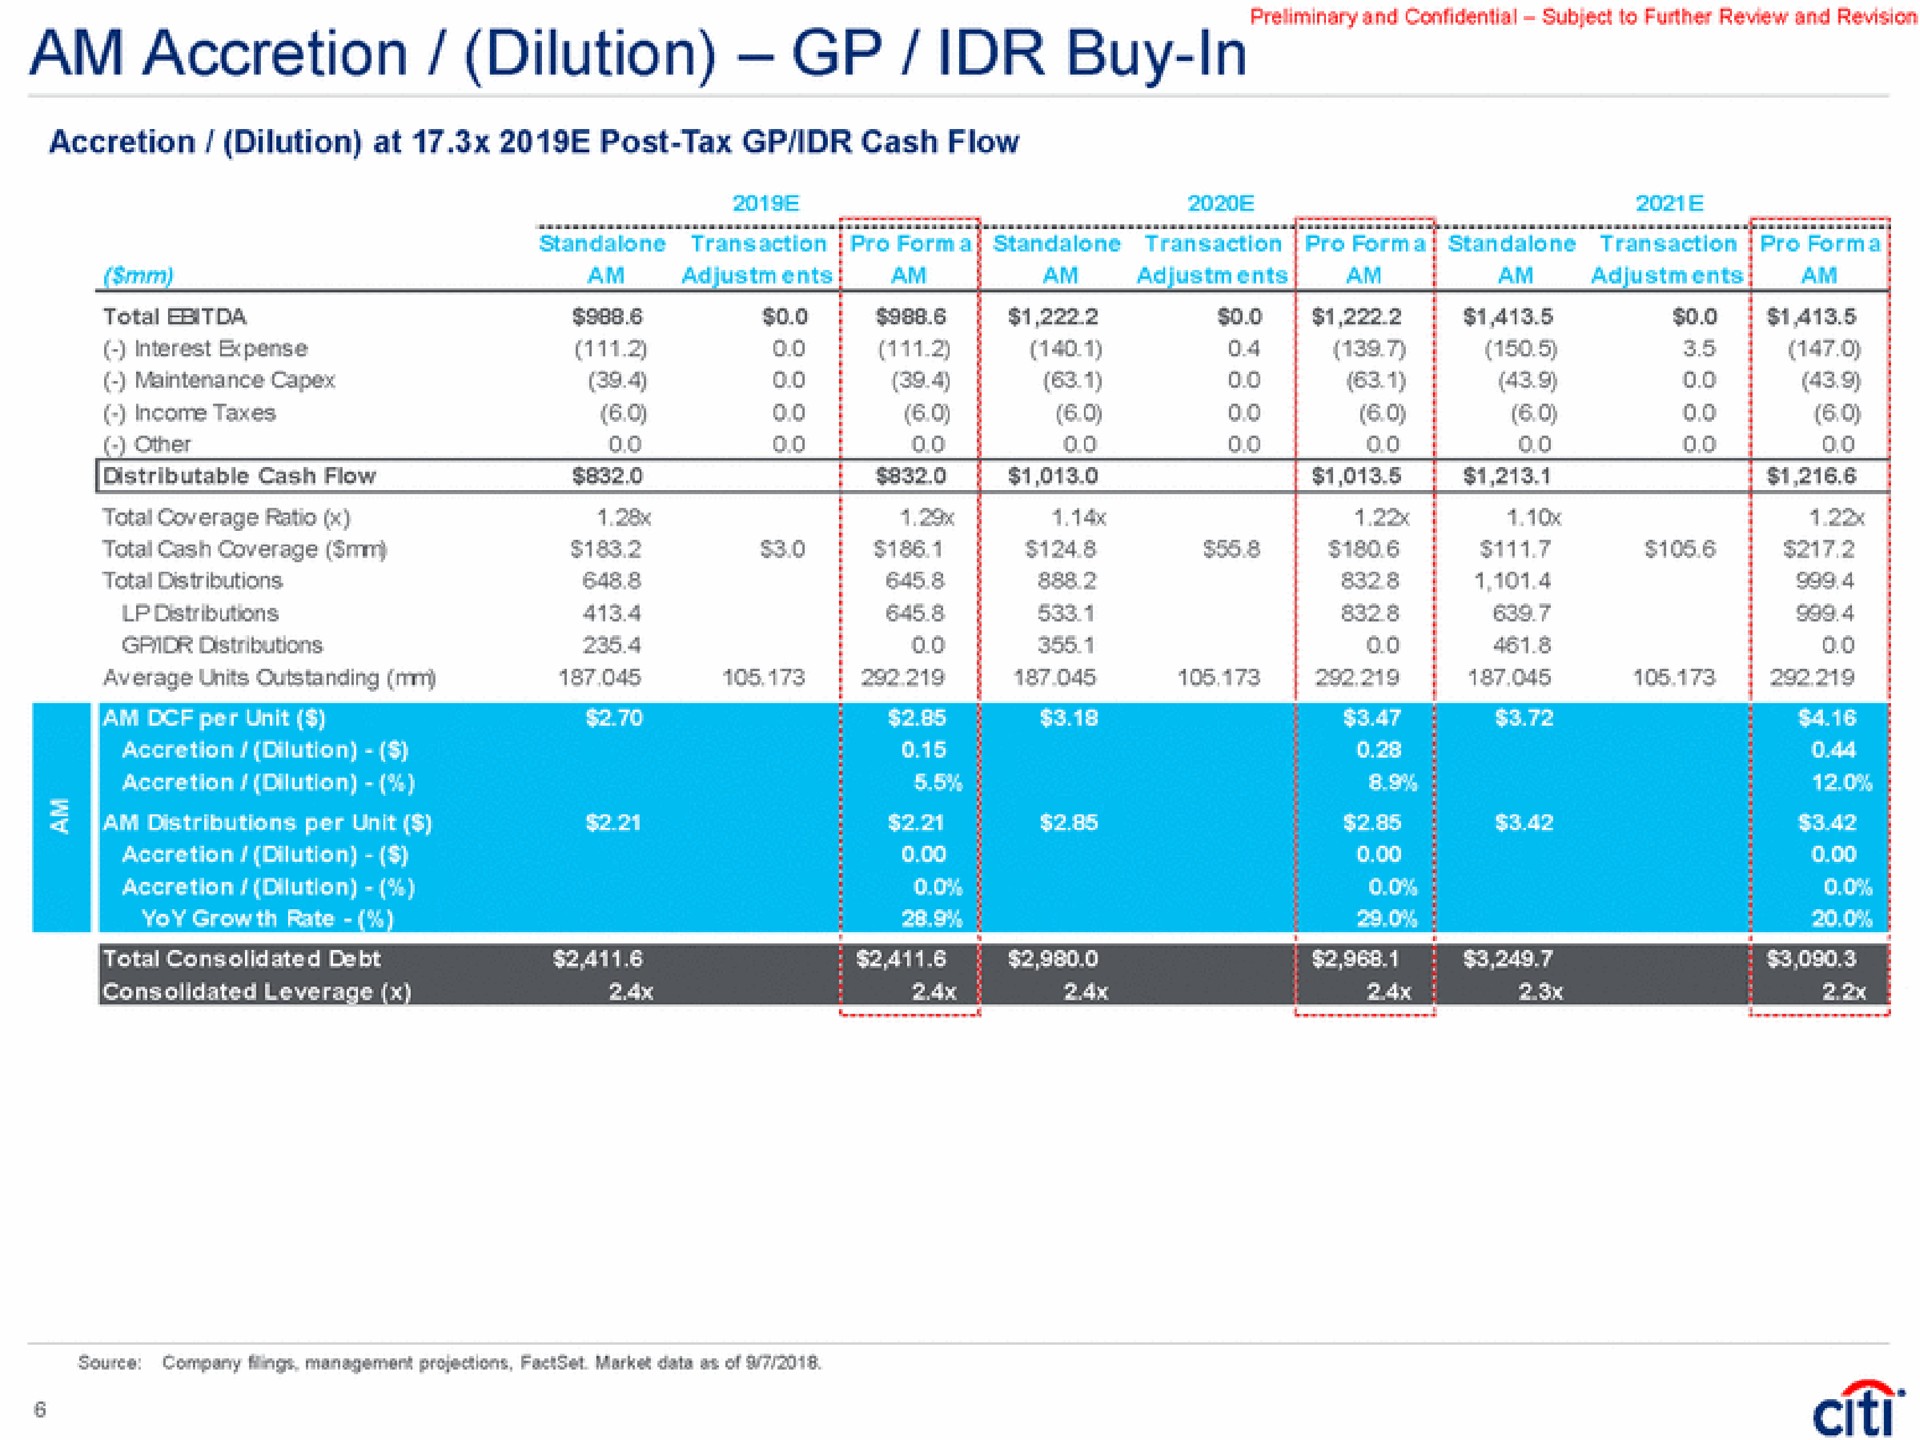 am accretion dilution buy in accretion dilution at post tax cash flow total ratio total cash coverage distributions distributions average units outstanding i | Citi